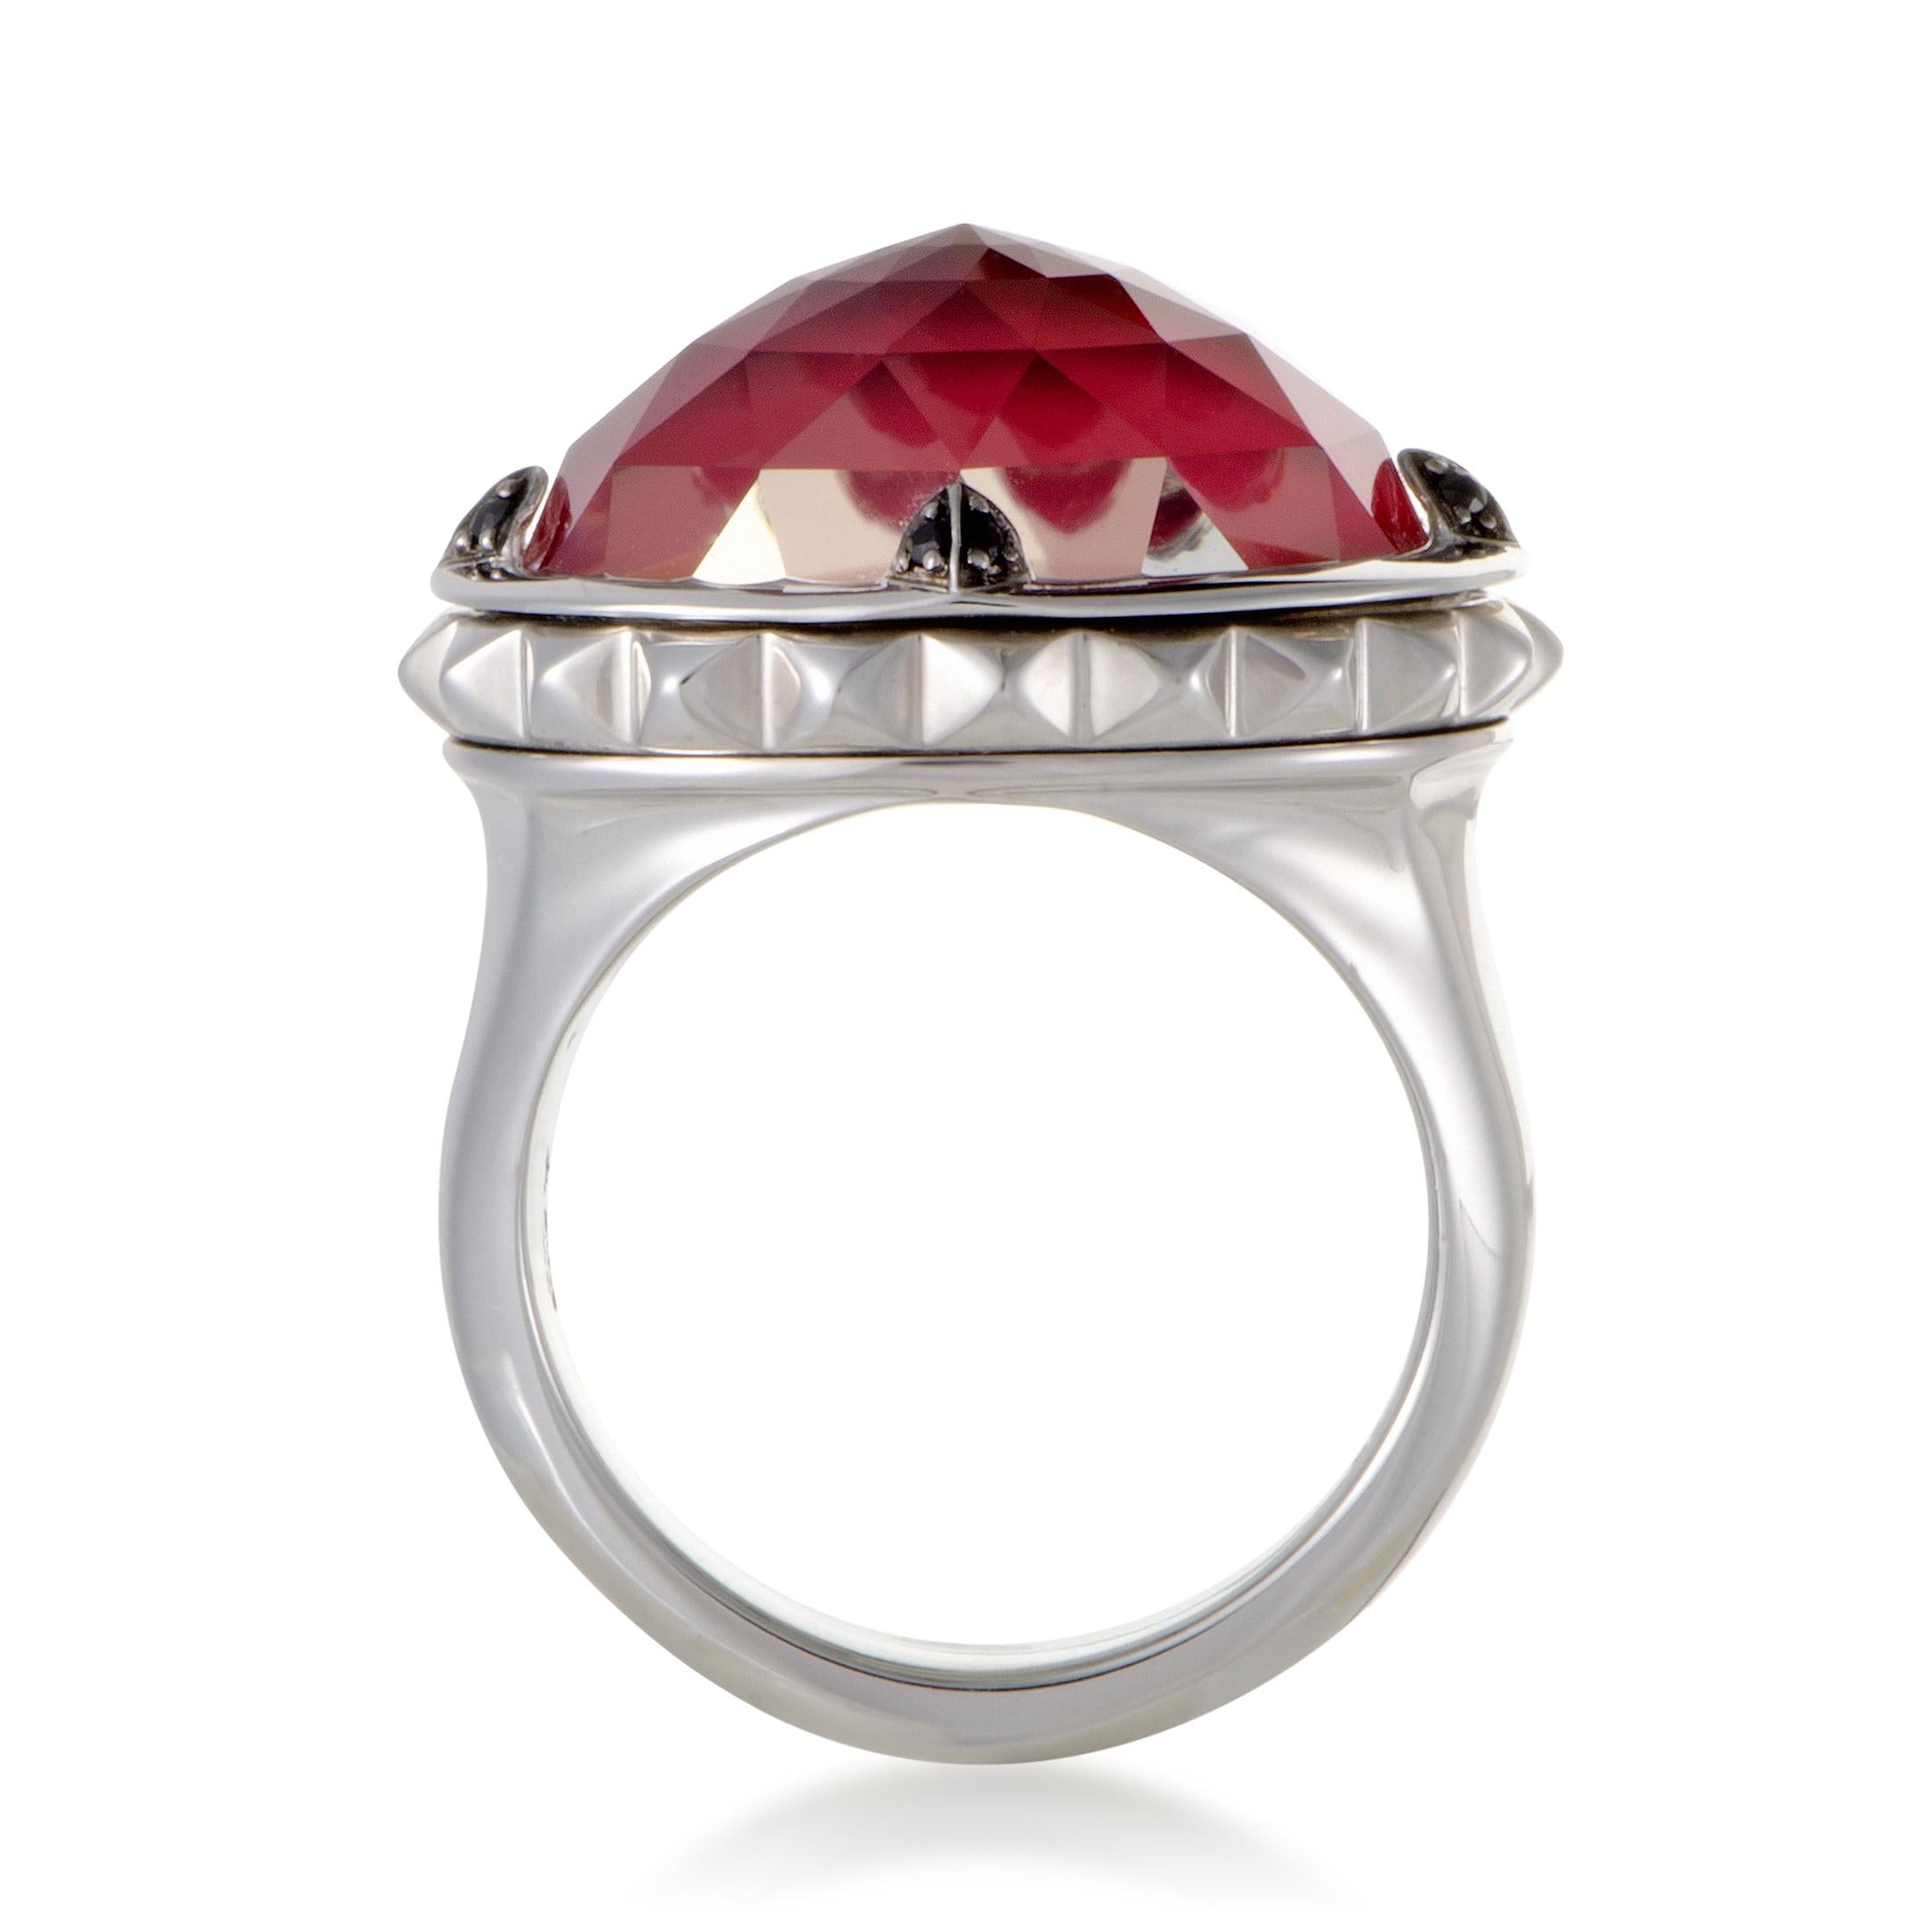 Set with splendidly sublime quartz, majestically beautiful synthetic red coral and extravagantly nifty black spinels, totaling 0.06 carats, this spectacular ring from the esteemed 'Superstud' collection by Stephen Webster places immensely exuberant